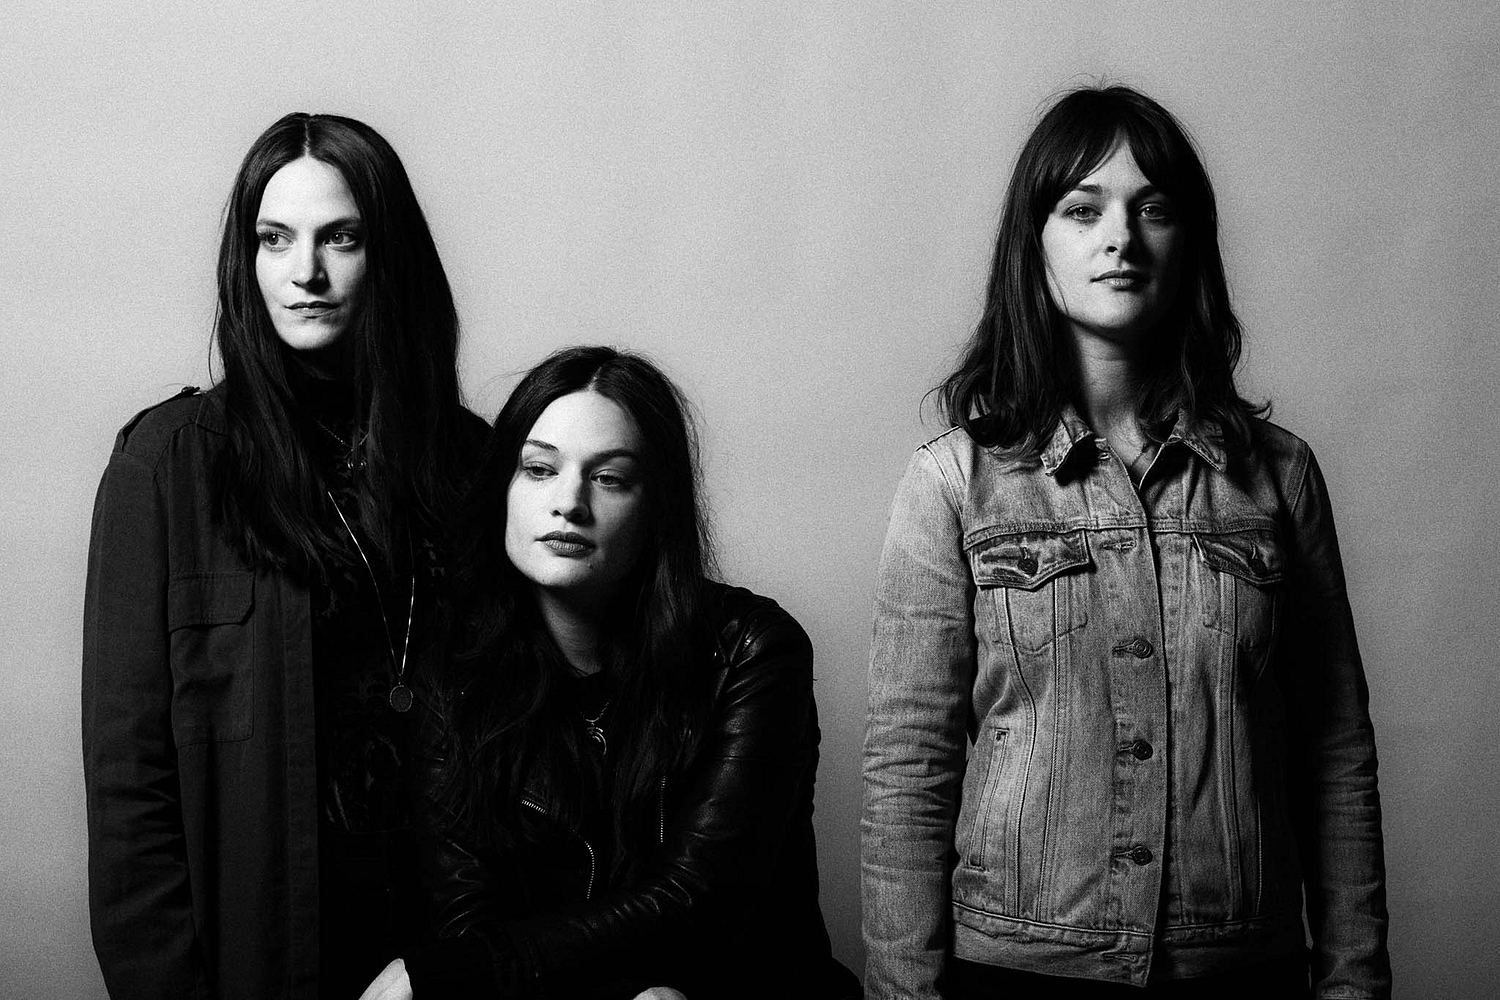 The Staves: “We’re trying not to think about things too much”